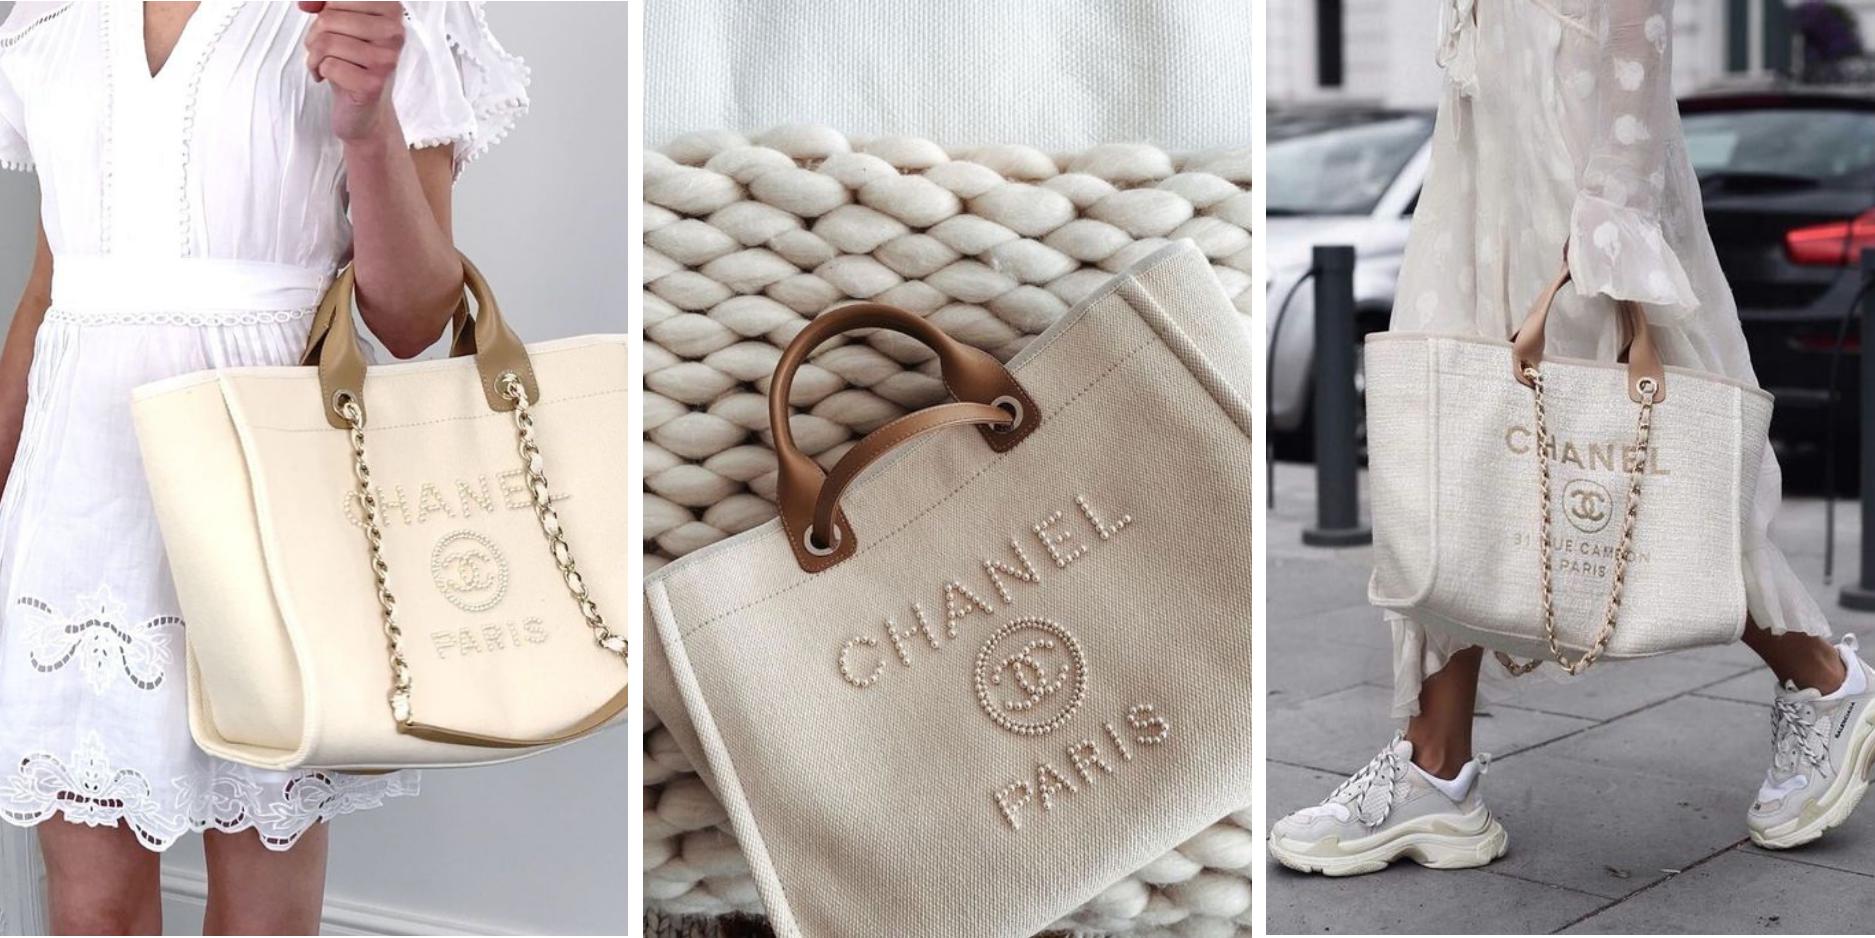 CHANEL DEAUVILLE: SMALL, MEDIUM, AND LARGE COMPARISON 